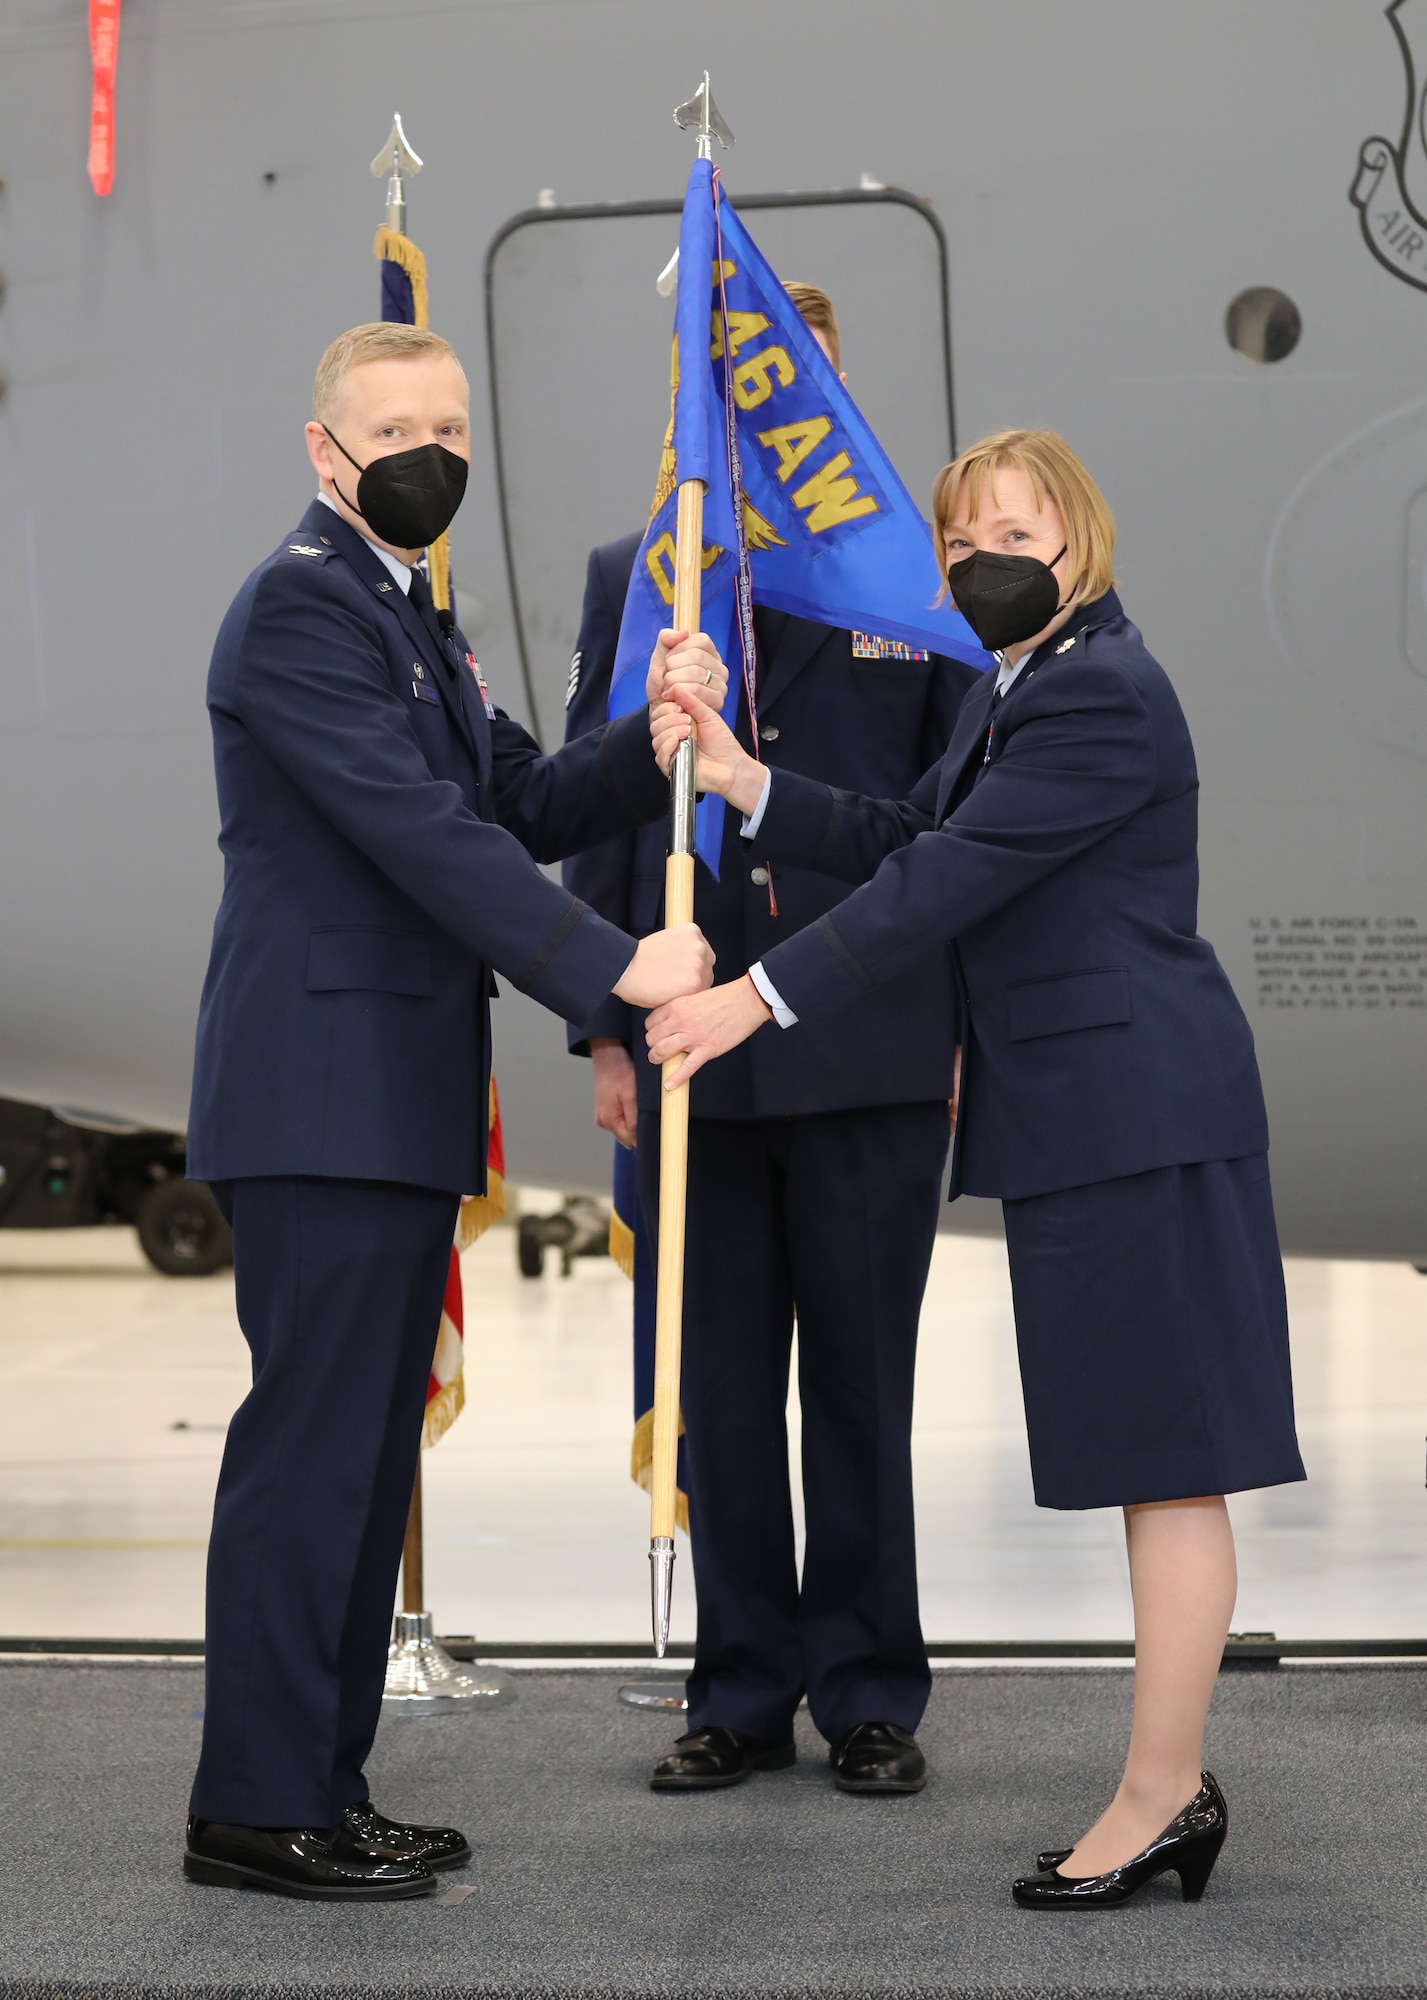 U.S. Air Force Lt. Col. Cynthia Welch assumes command of the 446th Operations Group from Col. Paul Skipworth, commander of the 446th Airlift Wing on March 6, 2021 at Joint Base Lewis-McChord, Washington.